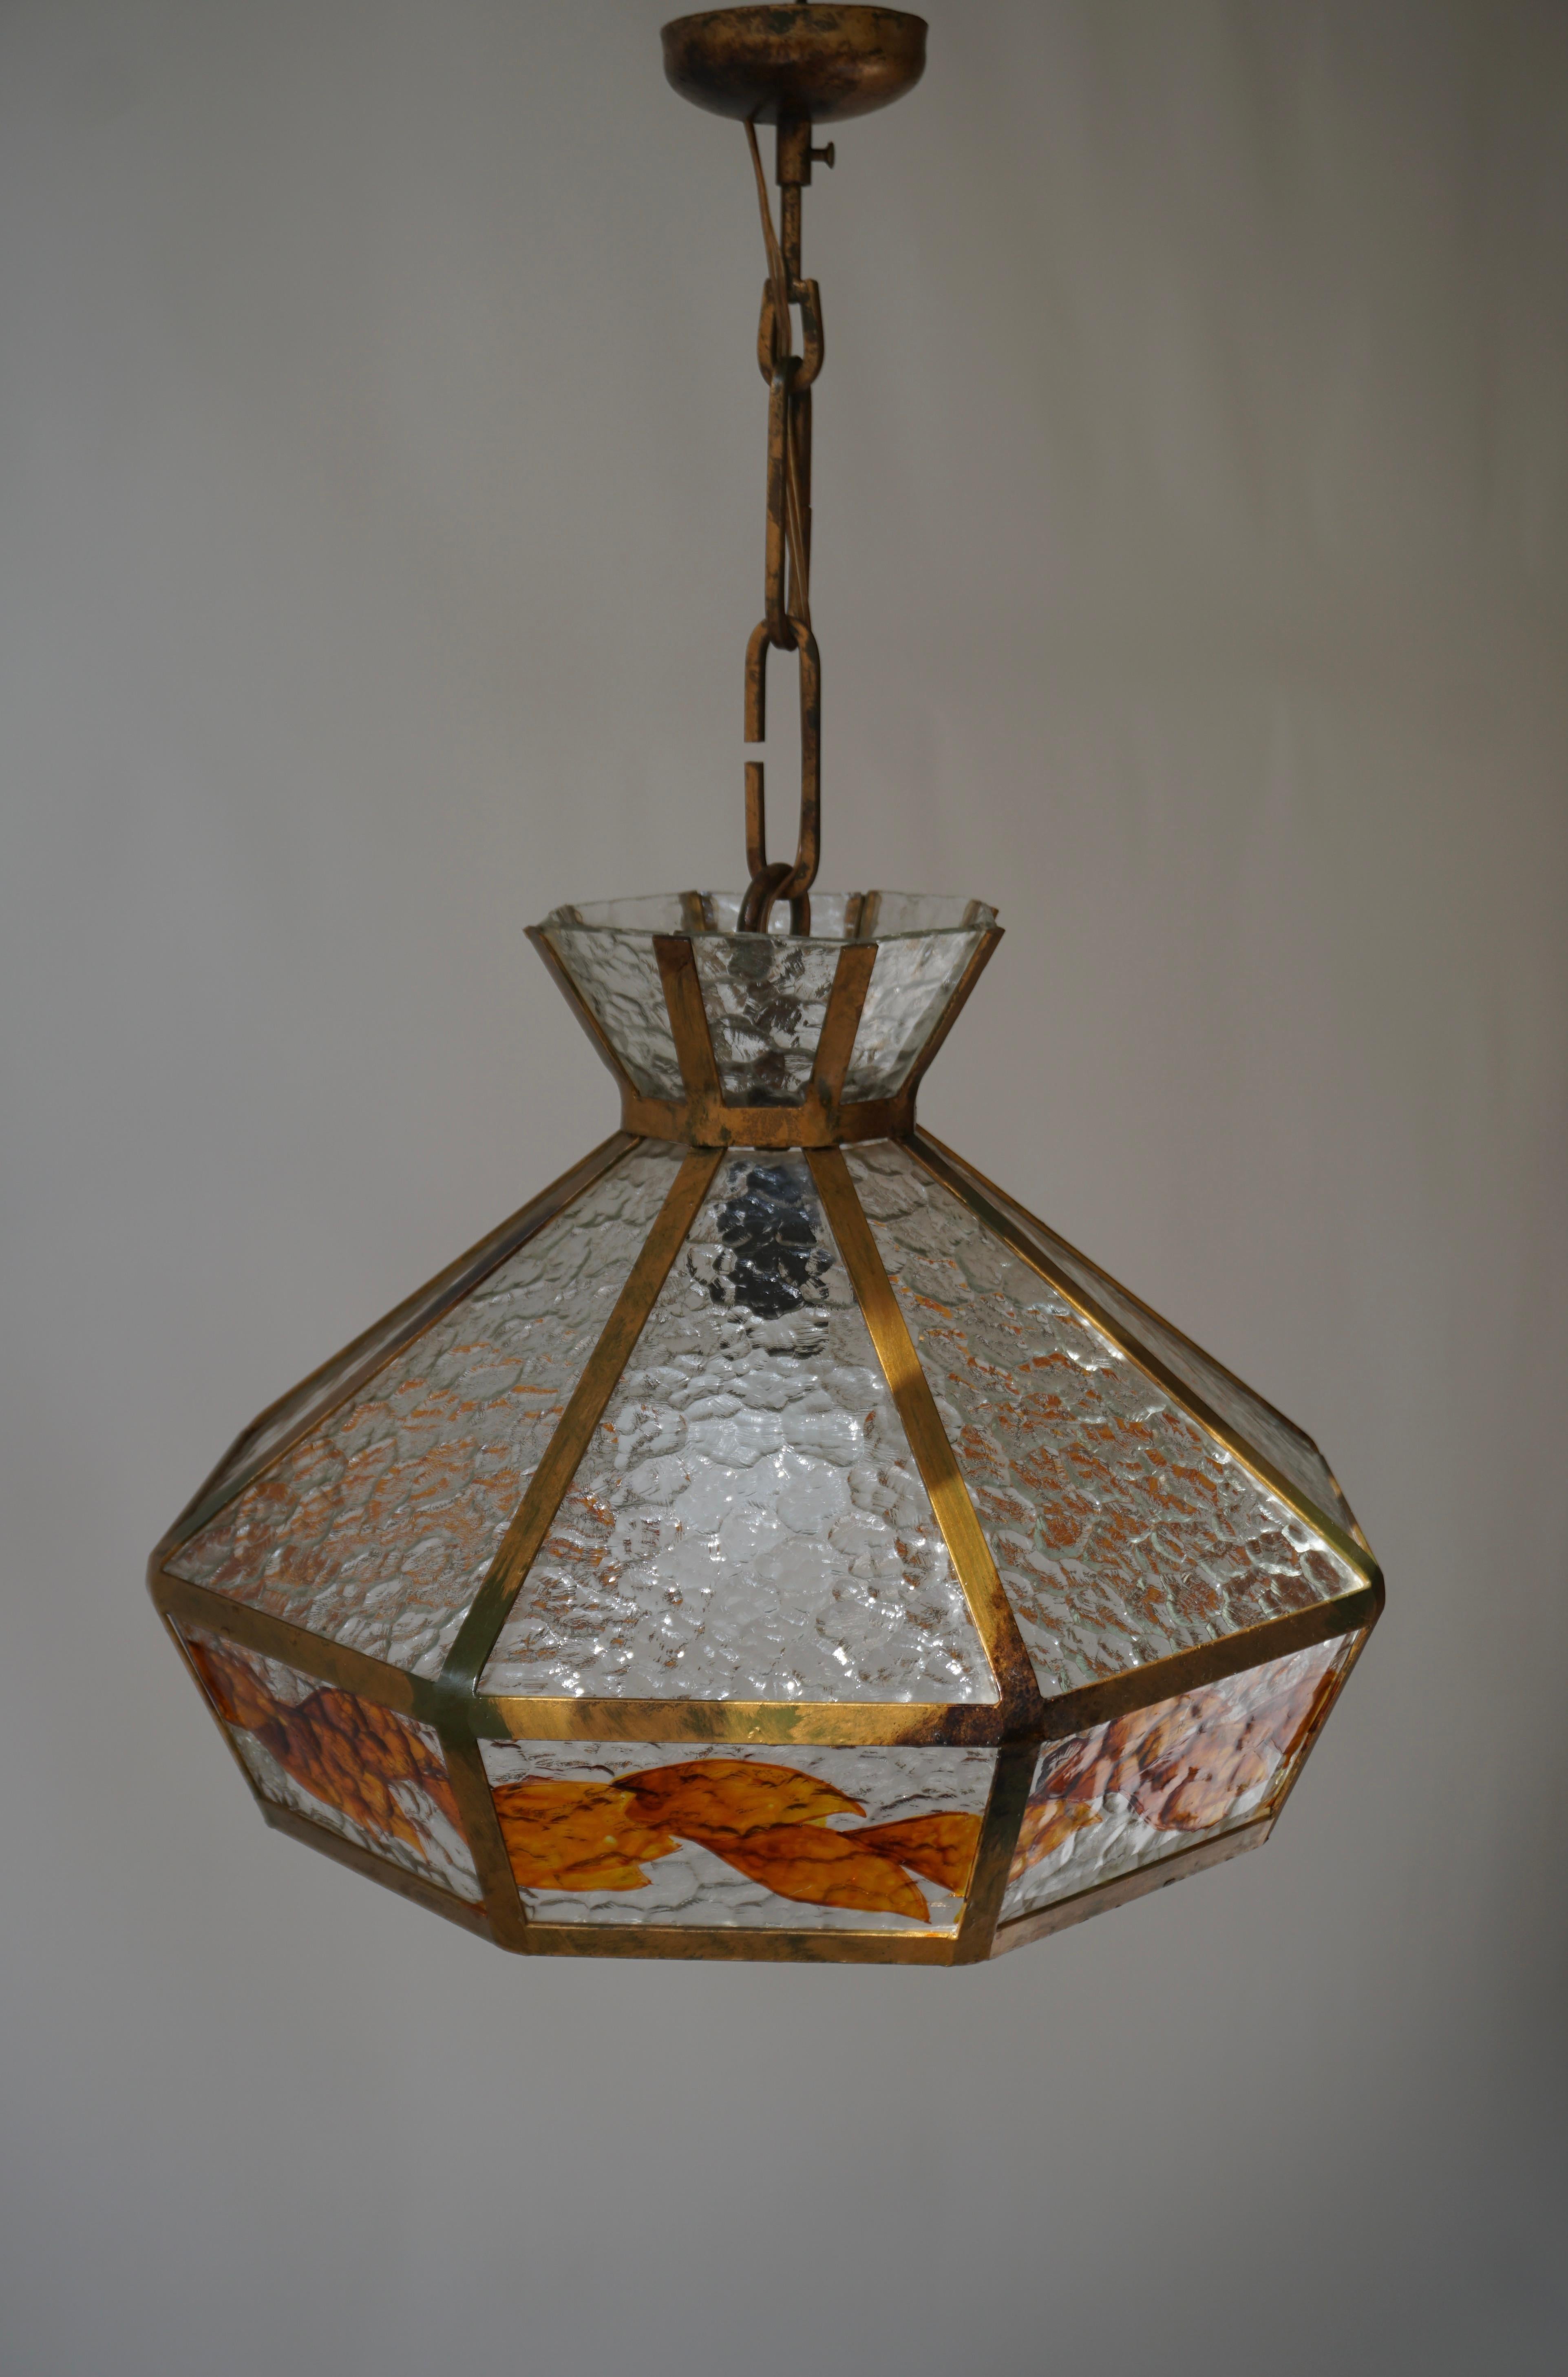 Brass Brutalist Hand Painted Stained Glass Pendant Light Fixture For Sale